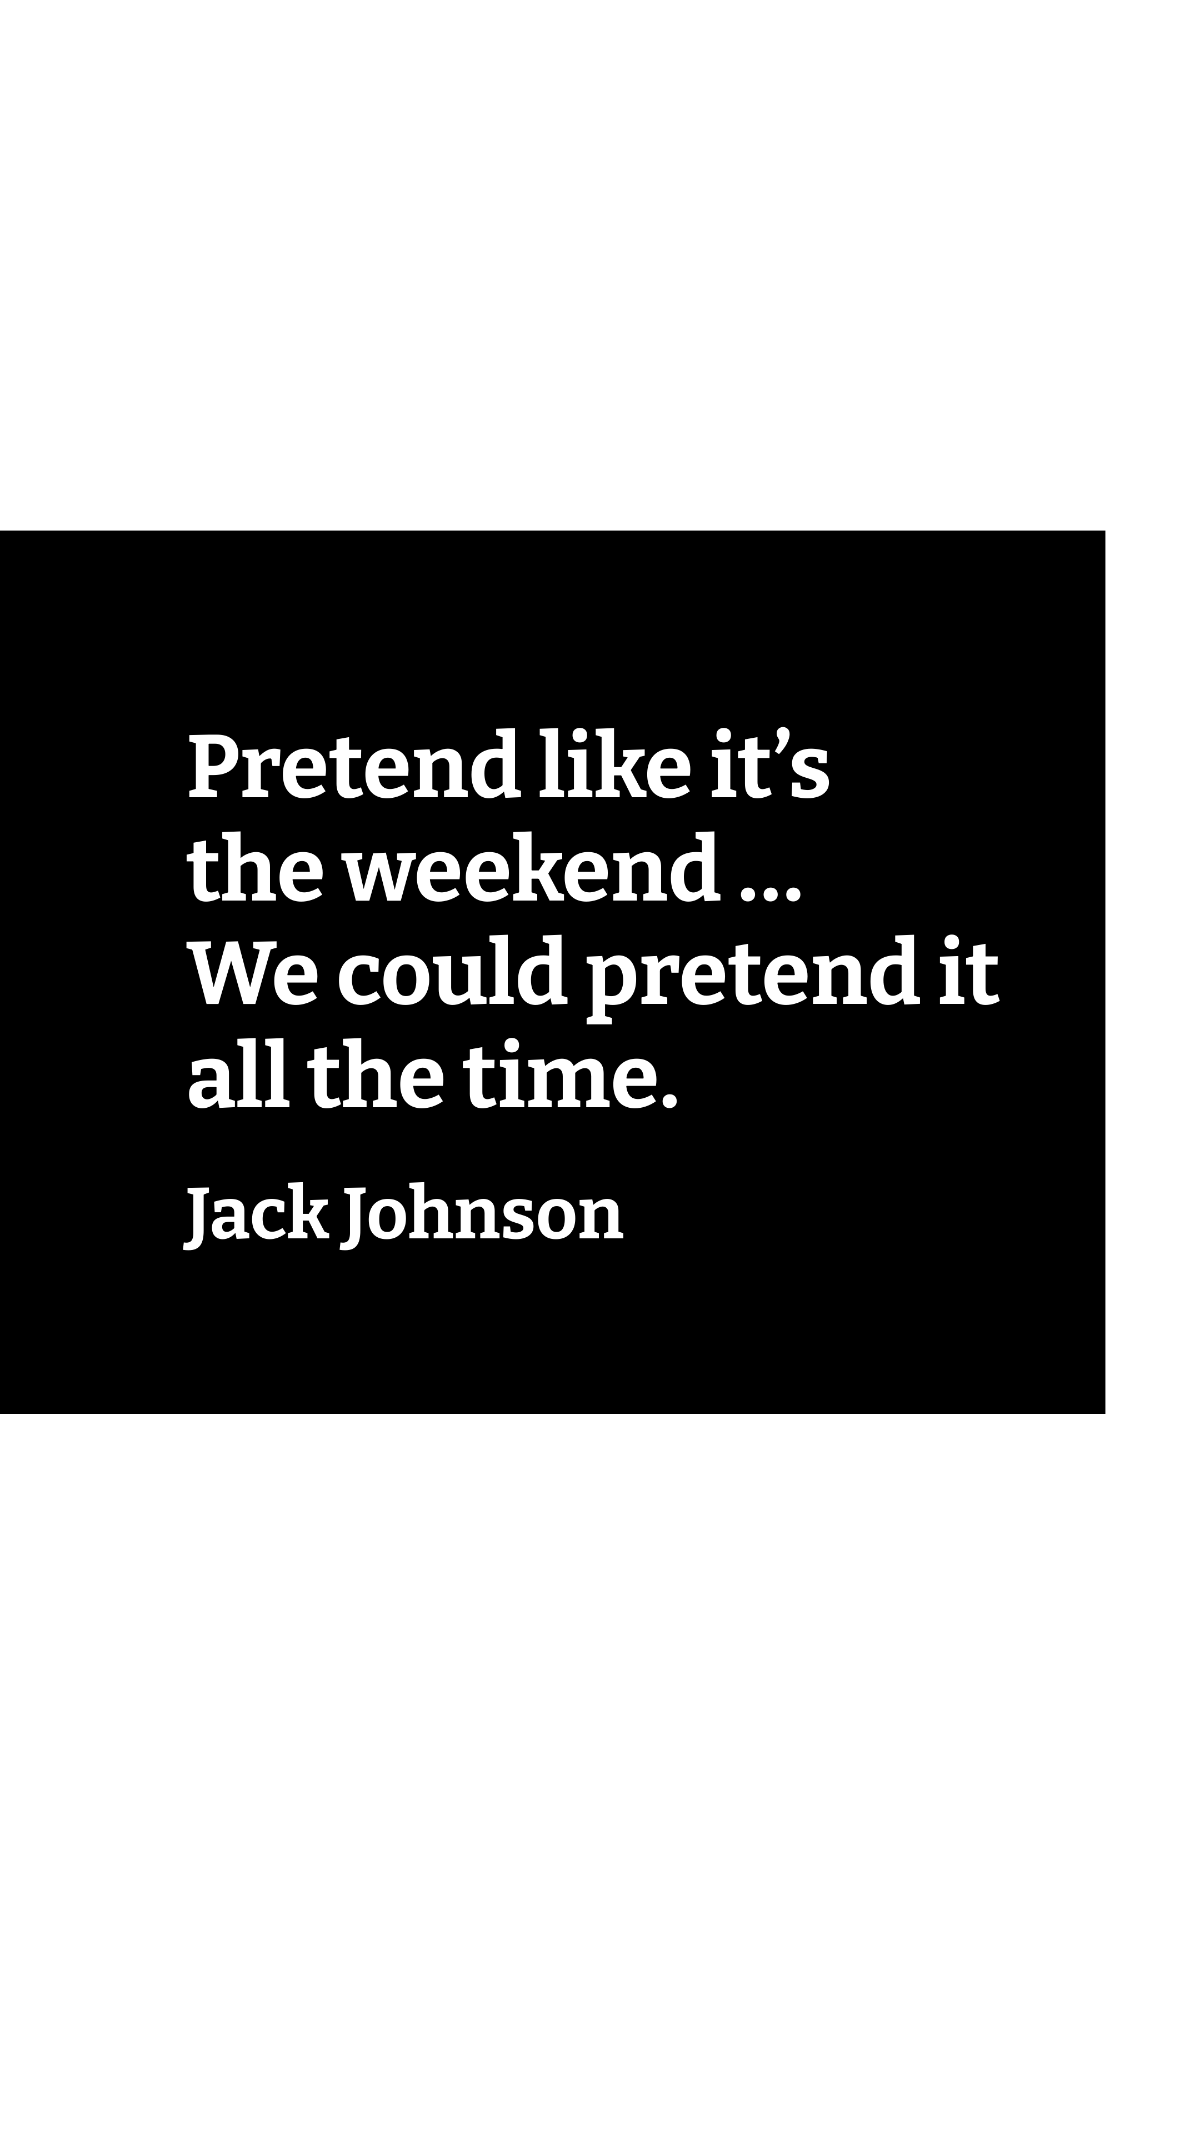 Free Jack Johnson - Pretend like it’s the weekend … We could pretend it all the time.  Template